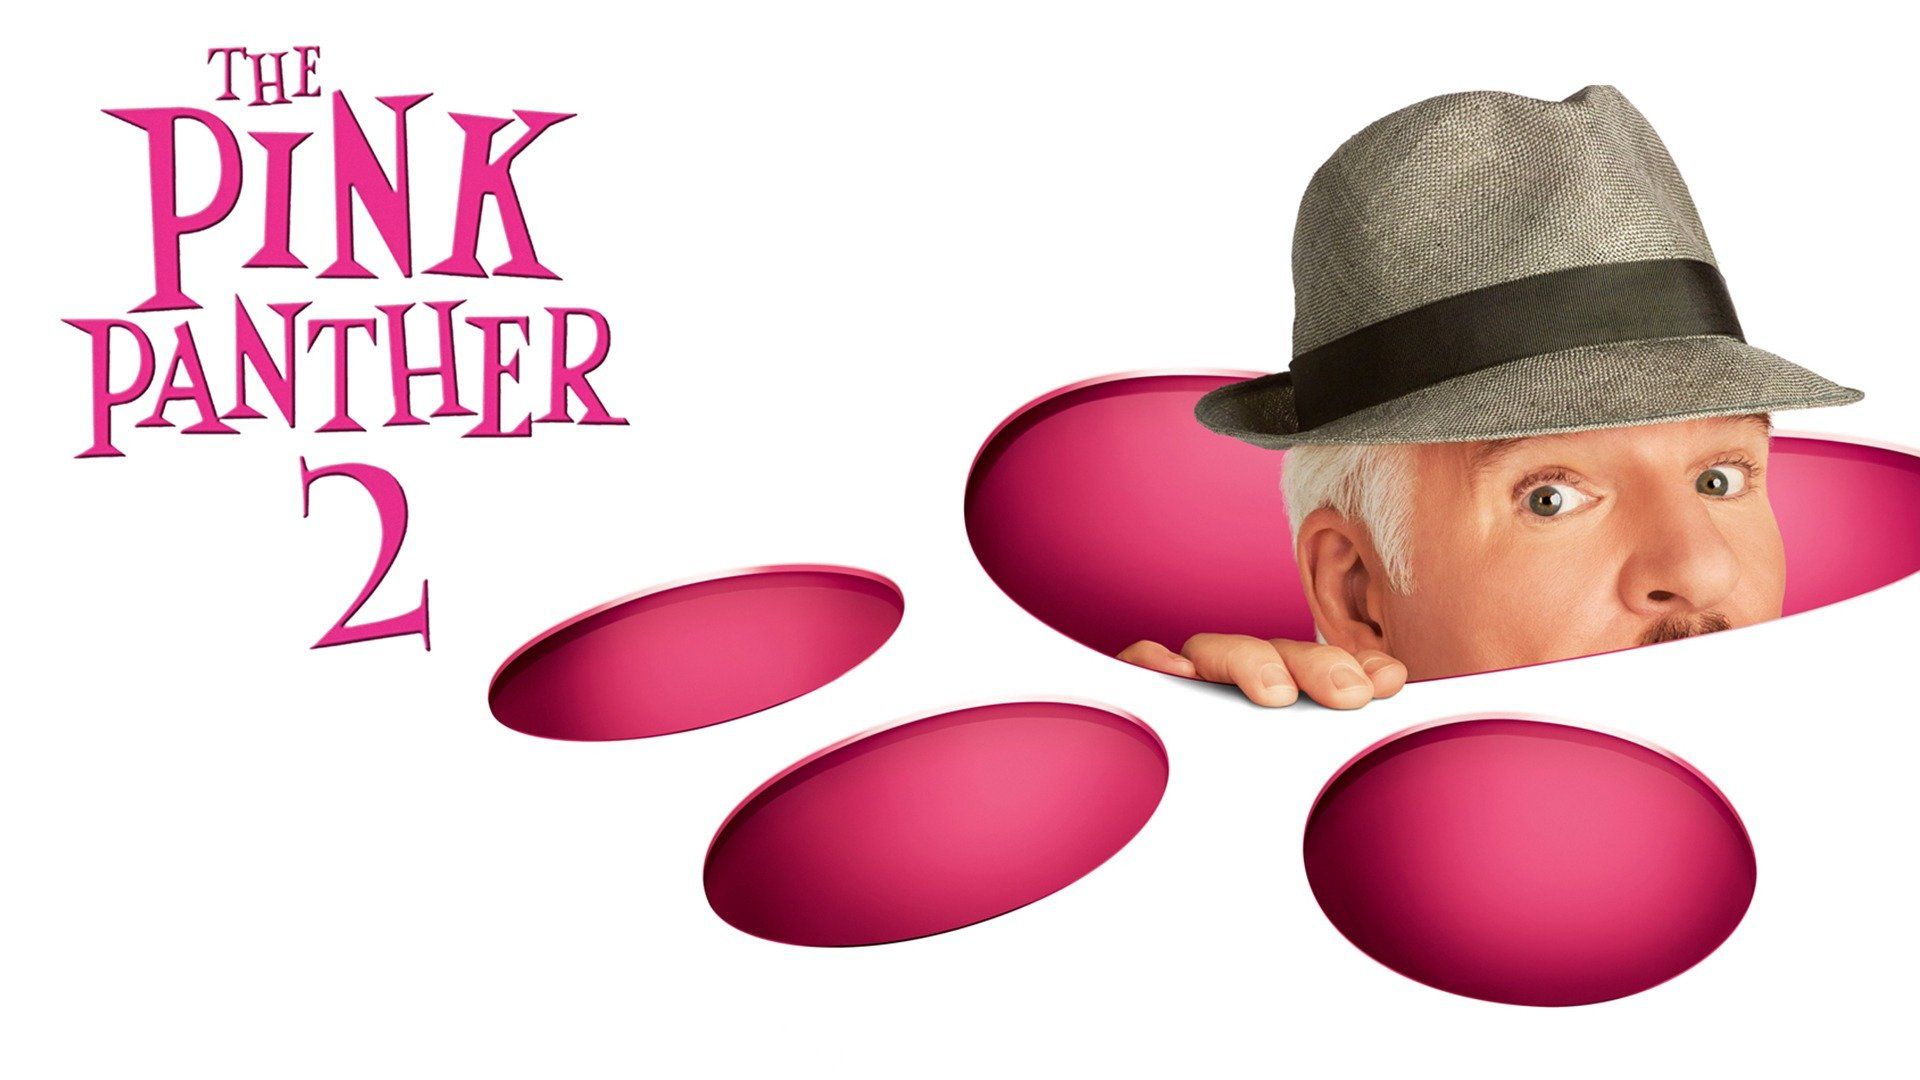 Watch The Pink Panther 2 2009 Full Movie Free Online Plex